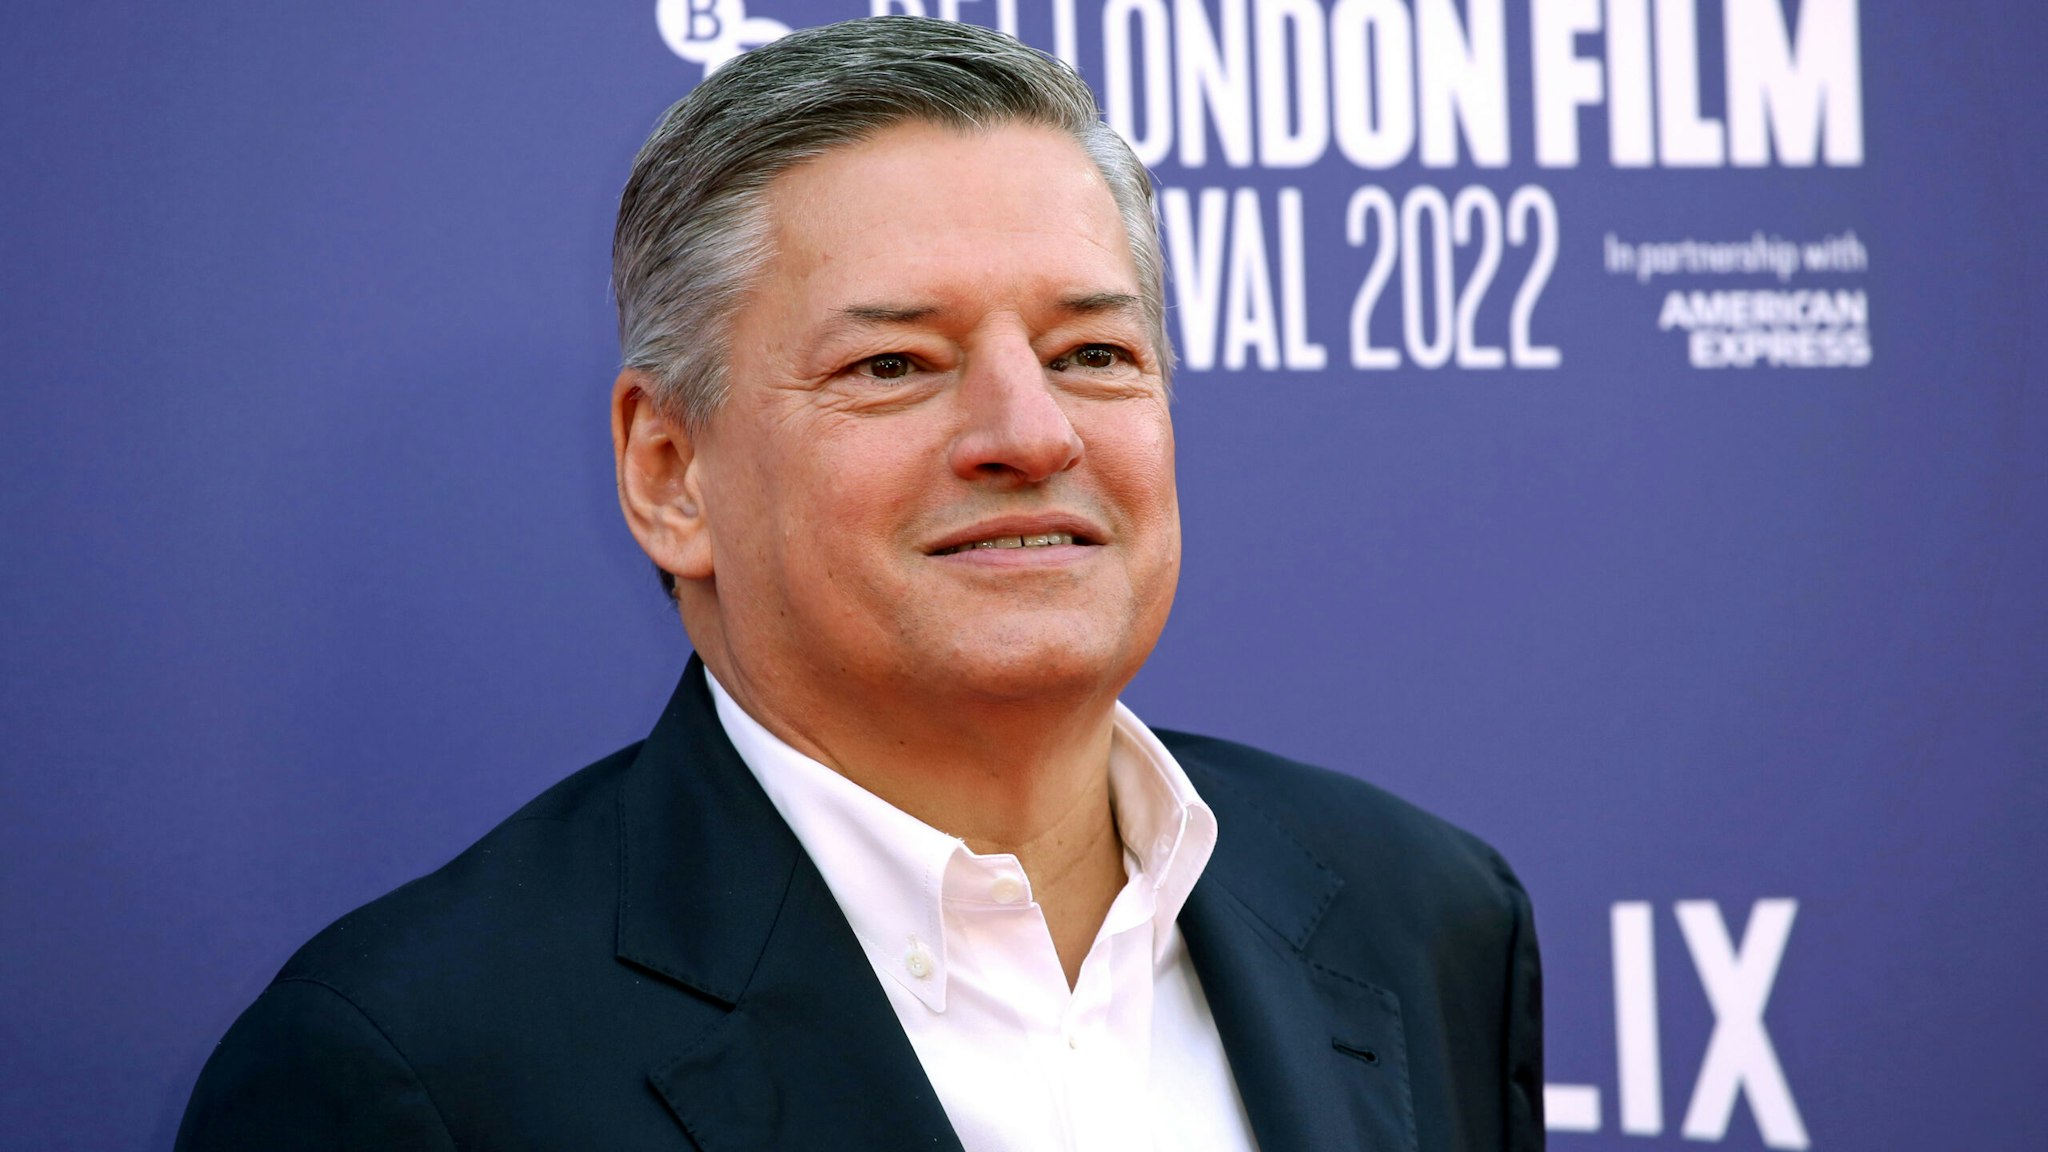 LONDON, ENGLAND - OCTOBER 15: Chief Content Officer of Netflix, Ted Sarandos attends the "Guillermo Del Toro's Pinocchio" world premiere during the 66th BFI London Film Festival at The Royal Festival Hall on October 15, 2022 in London, England.